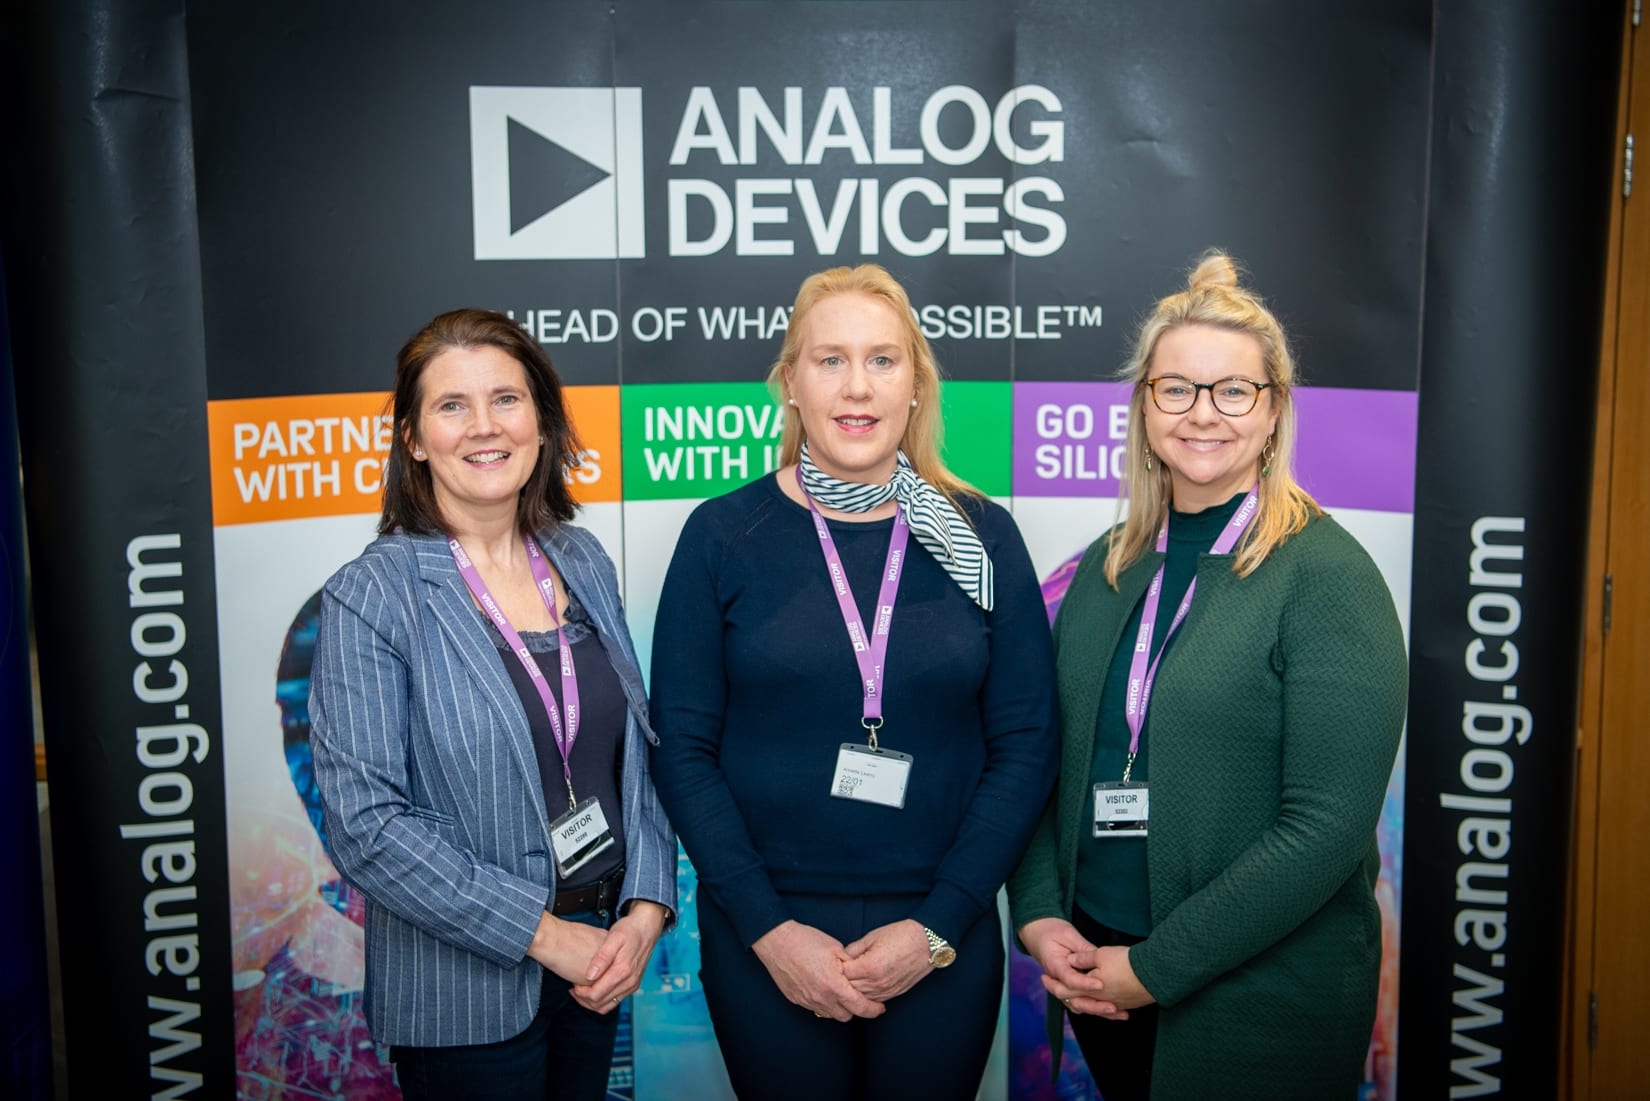 No repro fee- Building your Employer Value Proposition event held in Analog Devices in association with Limerick Chamber on Wednesday 22nd January 2020  - From Left to Right: Anne Morris and Annette Leamy both from Limerick Chamber Skillnet, Annie Browne - Action Point. 
Photo credit Shauna Kennedy